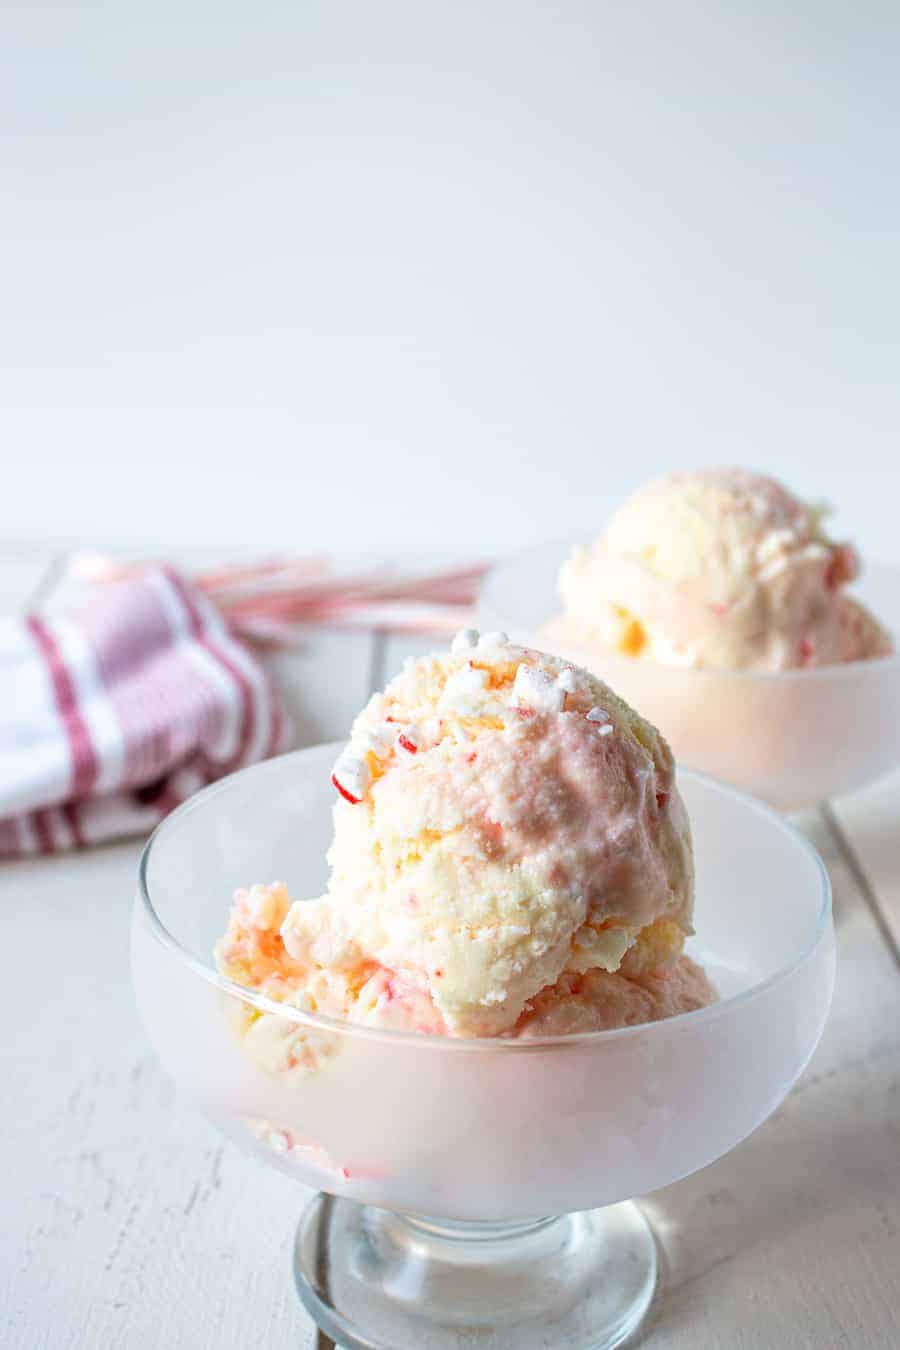 Ice cream dishes filled with scoops of pink ice cream.